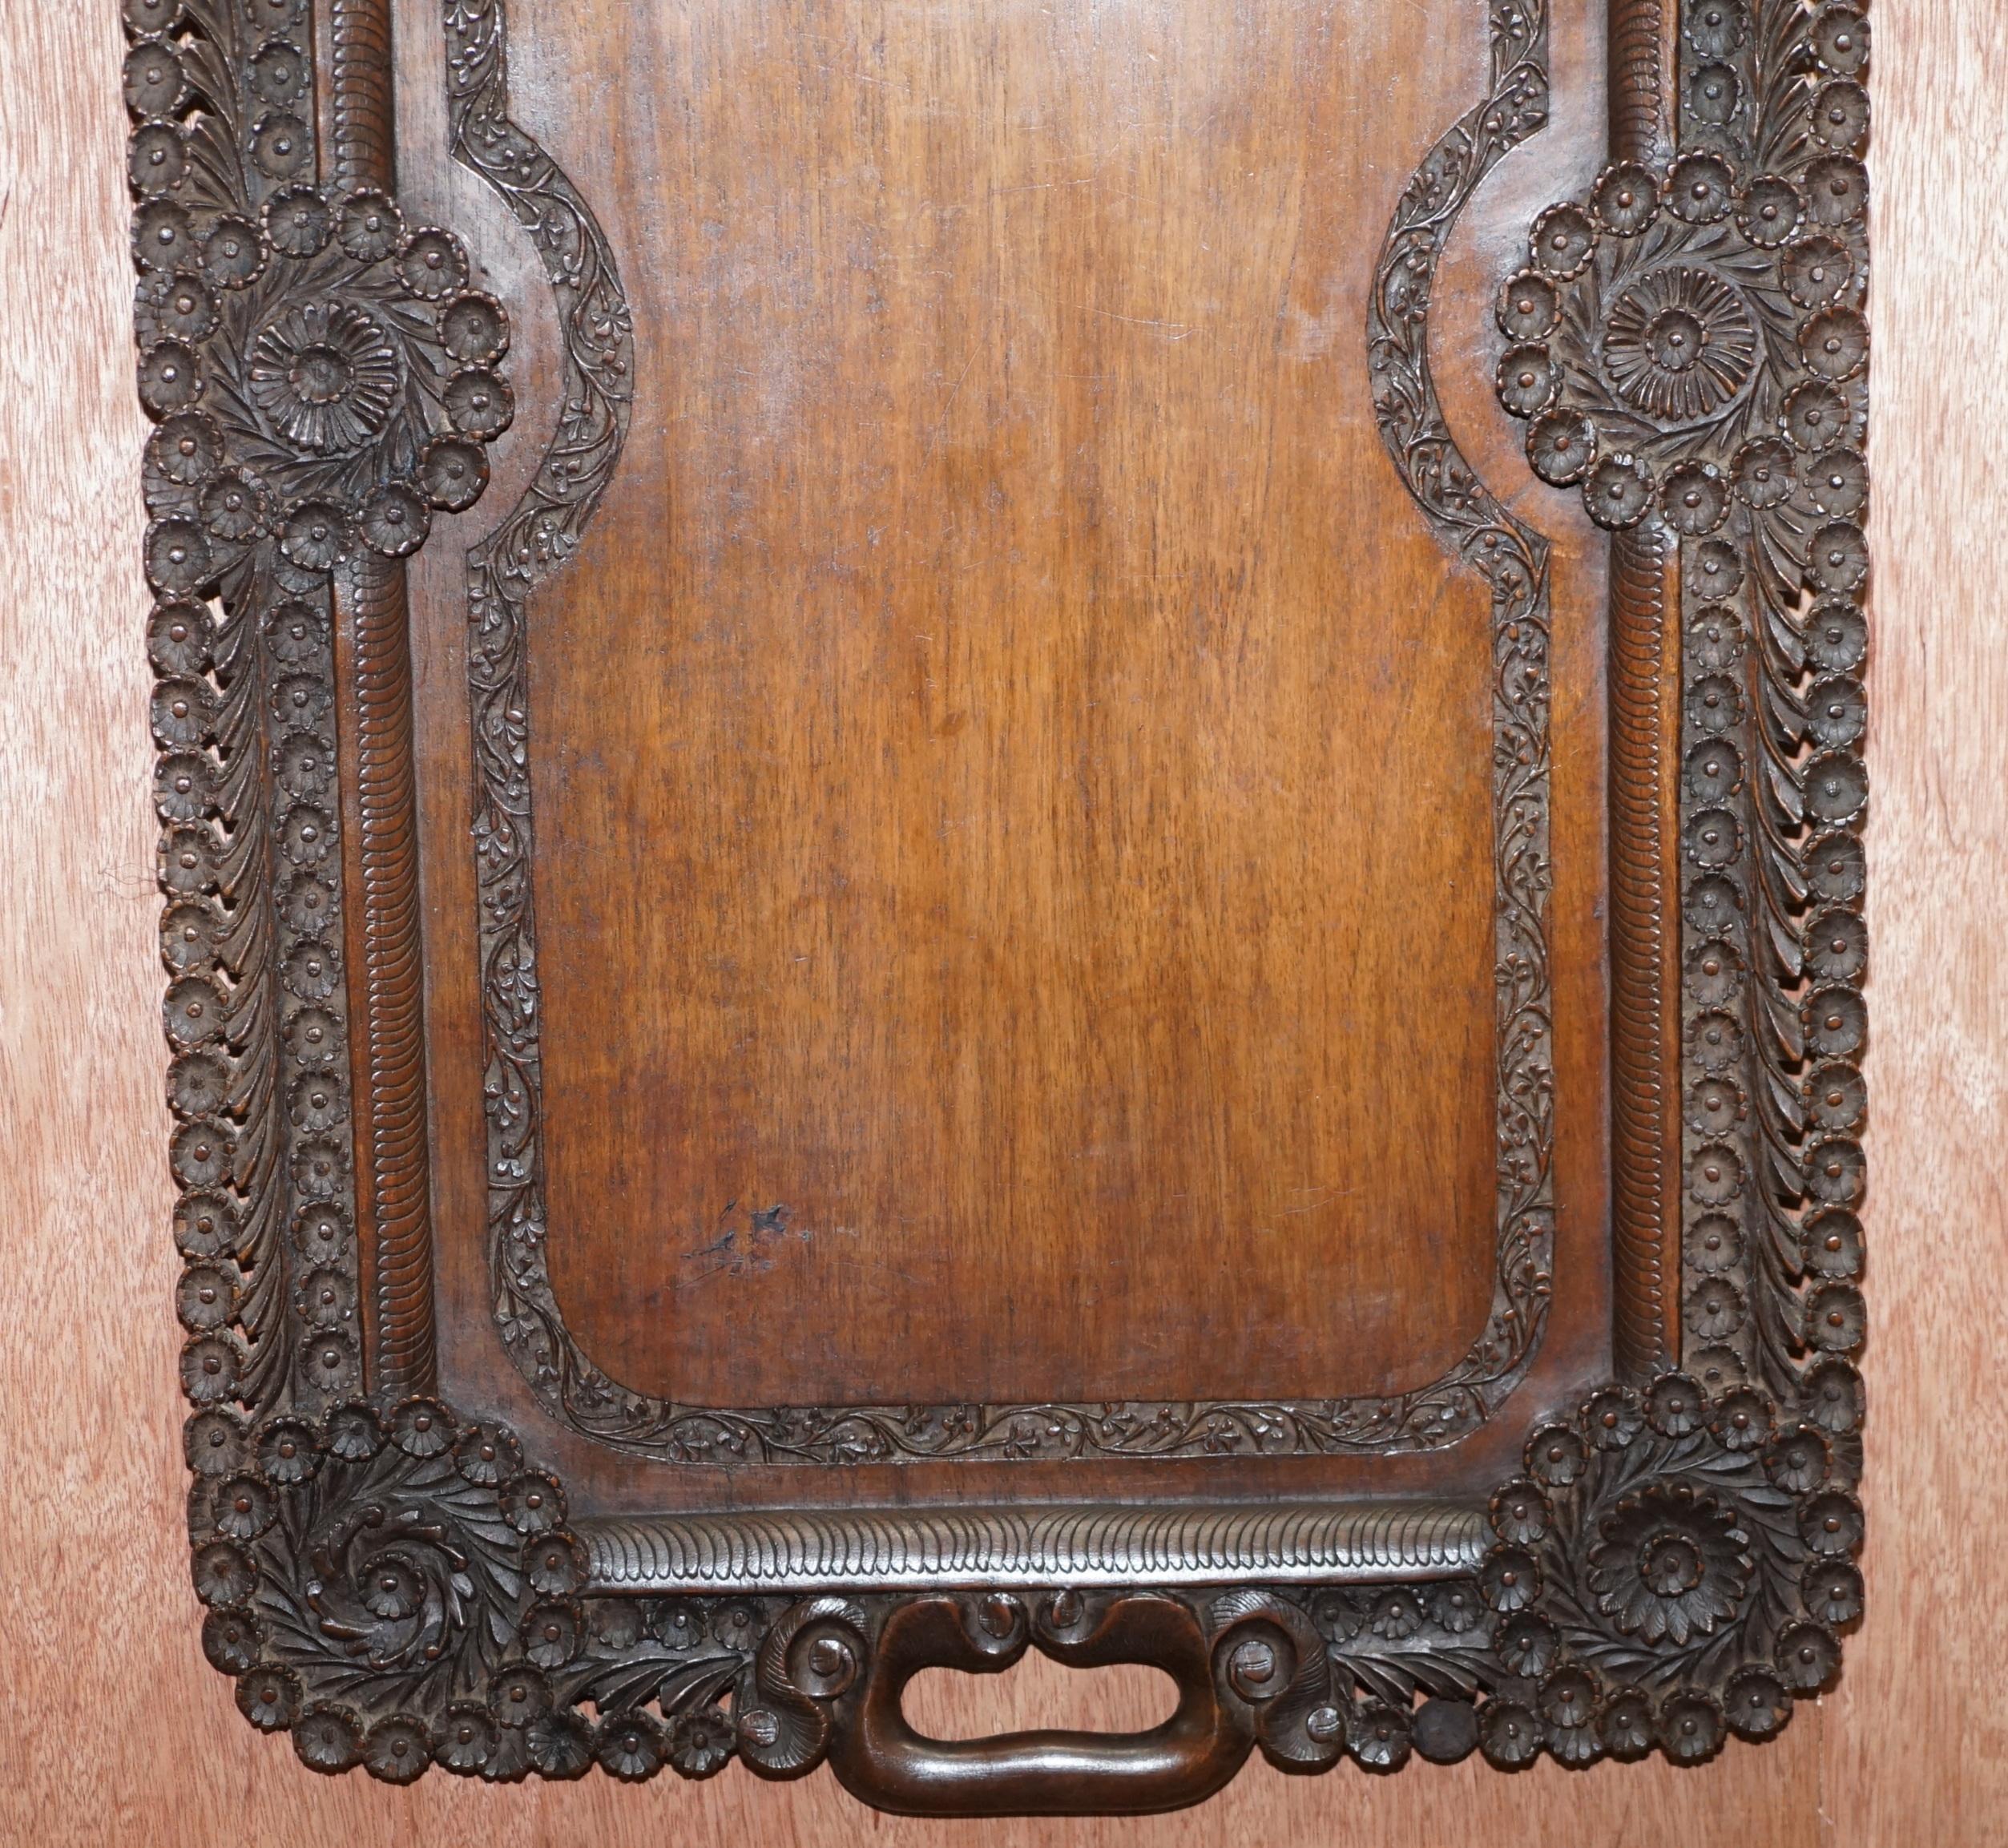 We are delighted to offer for sale this very rare circa 1900 Anglo-Indian hand carved from a single piece of timber serving tray

A very good looking and exquisitely carved piece, the piece is in Mahogany and is floral carved all over 

We have